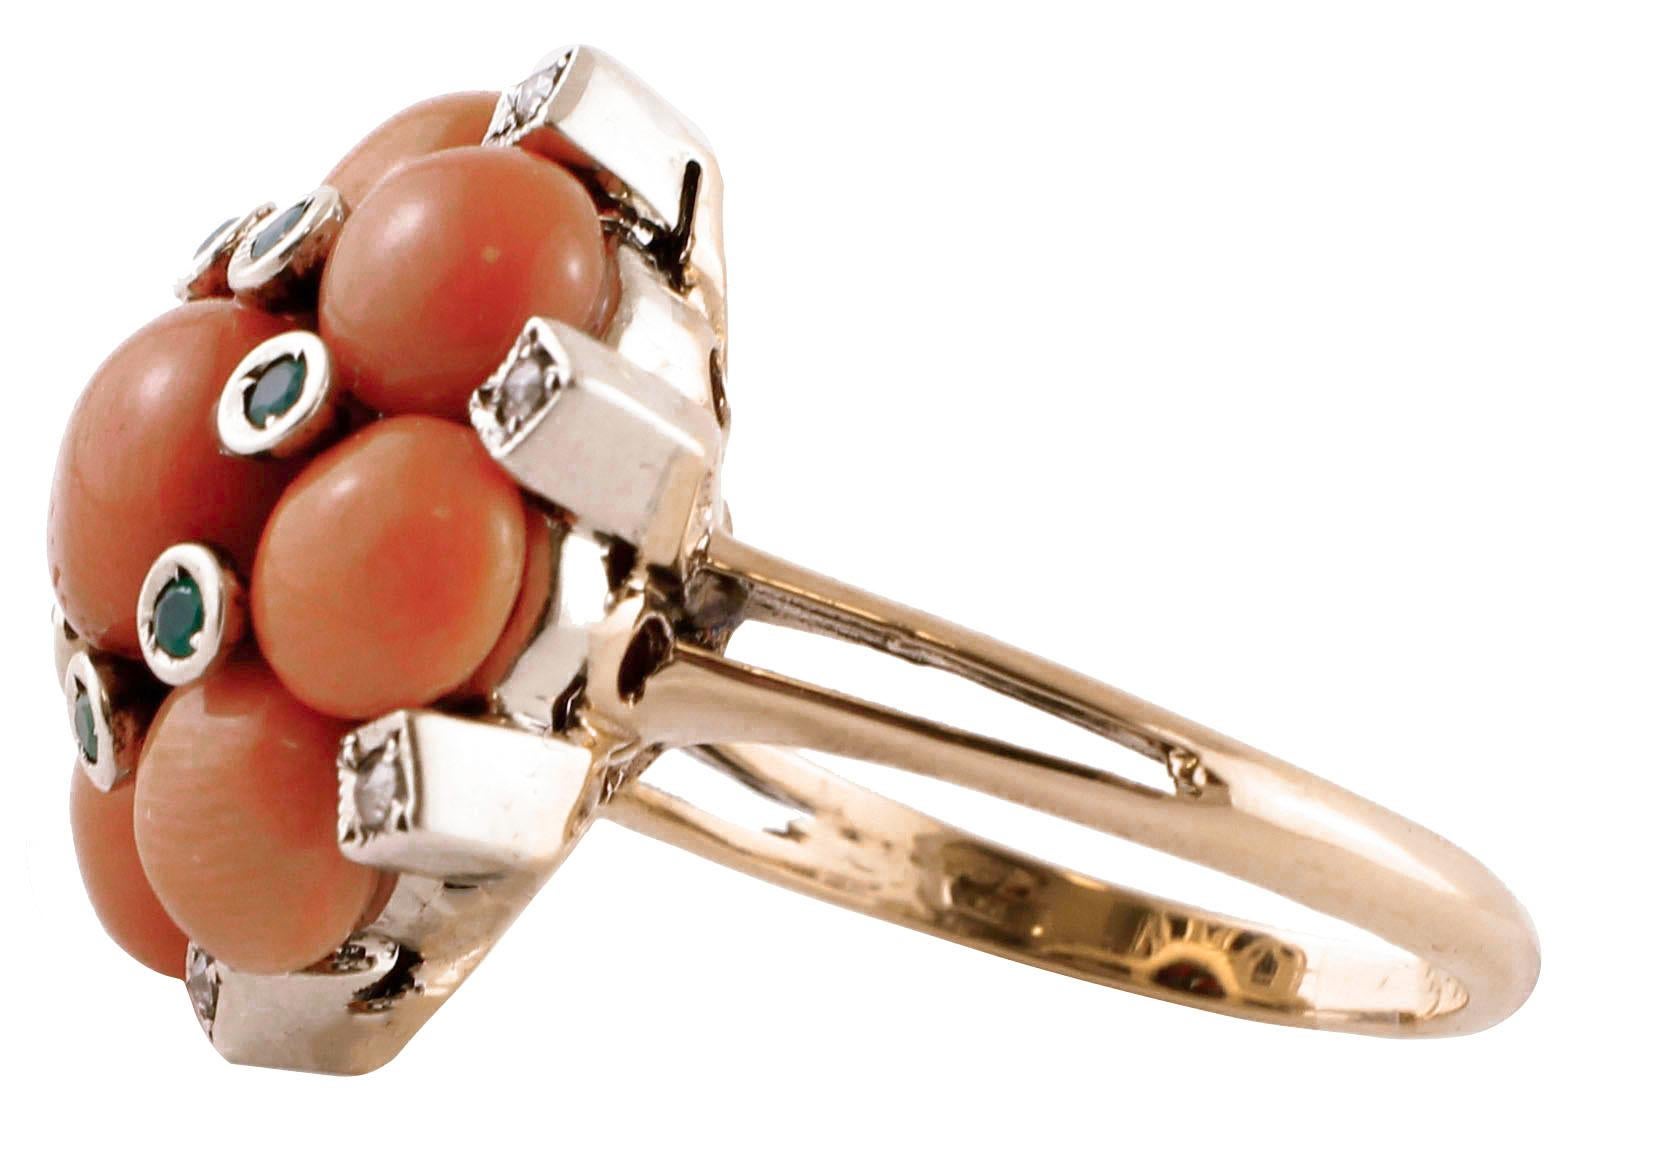 Simple ring realized with flower design in 9K rose gold and silver, mounted with coral sphere in the center surrounded by 0.10 ct of green agate crown and coral buttons like petals. It is embellished with 0.14 ct of diamonds beetween